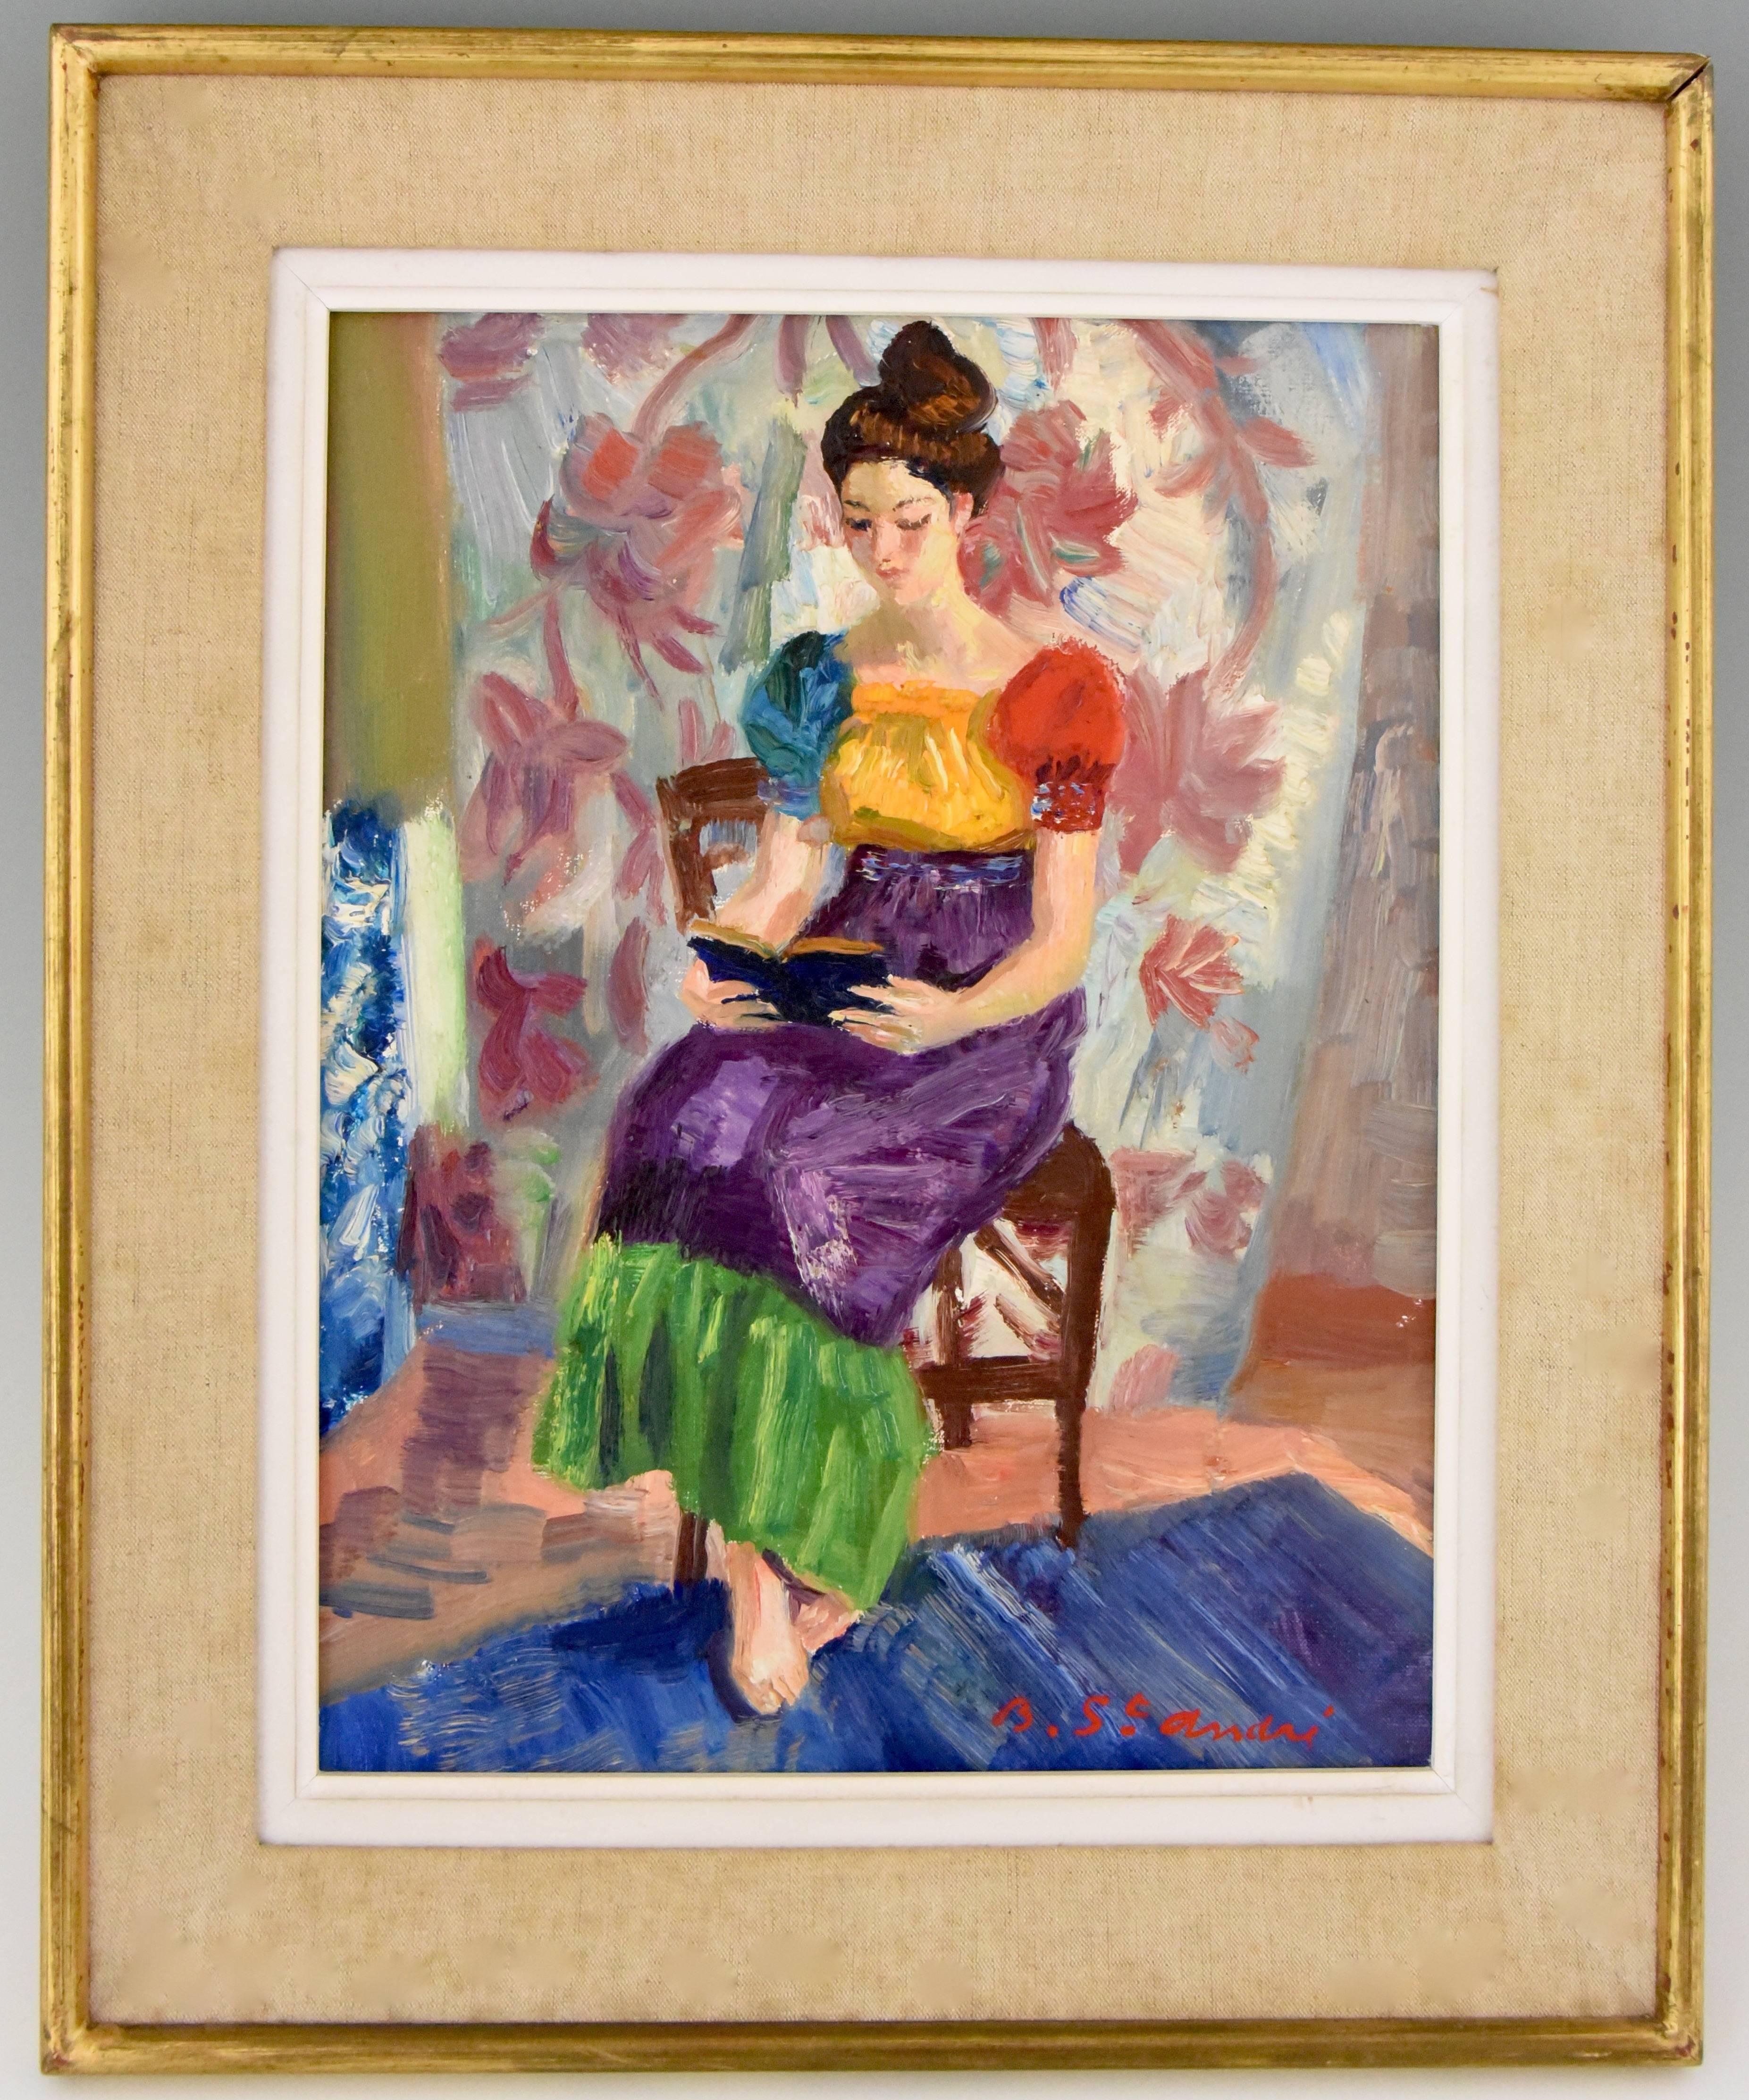 “Claudia à l’etang”
Painting of a reading woman on a chair.
The young wears a colorful dress and is sitting in front of a curtain with flowers, her feet resting on a a blue carpet

Artist or maker: Louis André Berthommé Saint André
Signature/